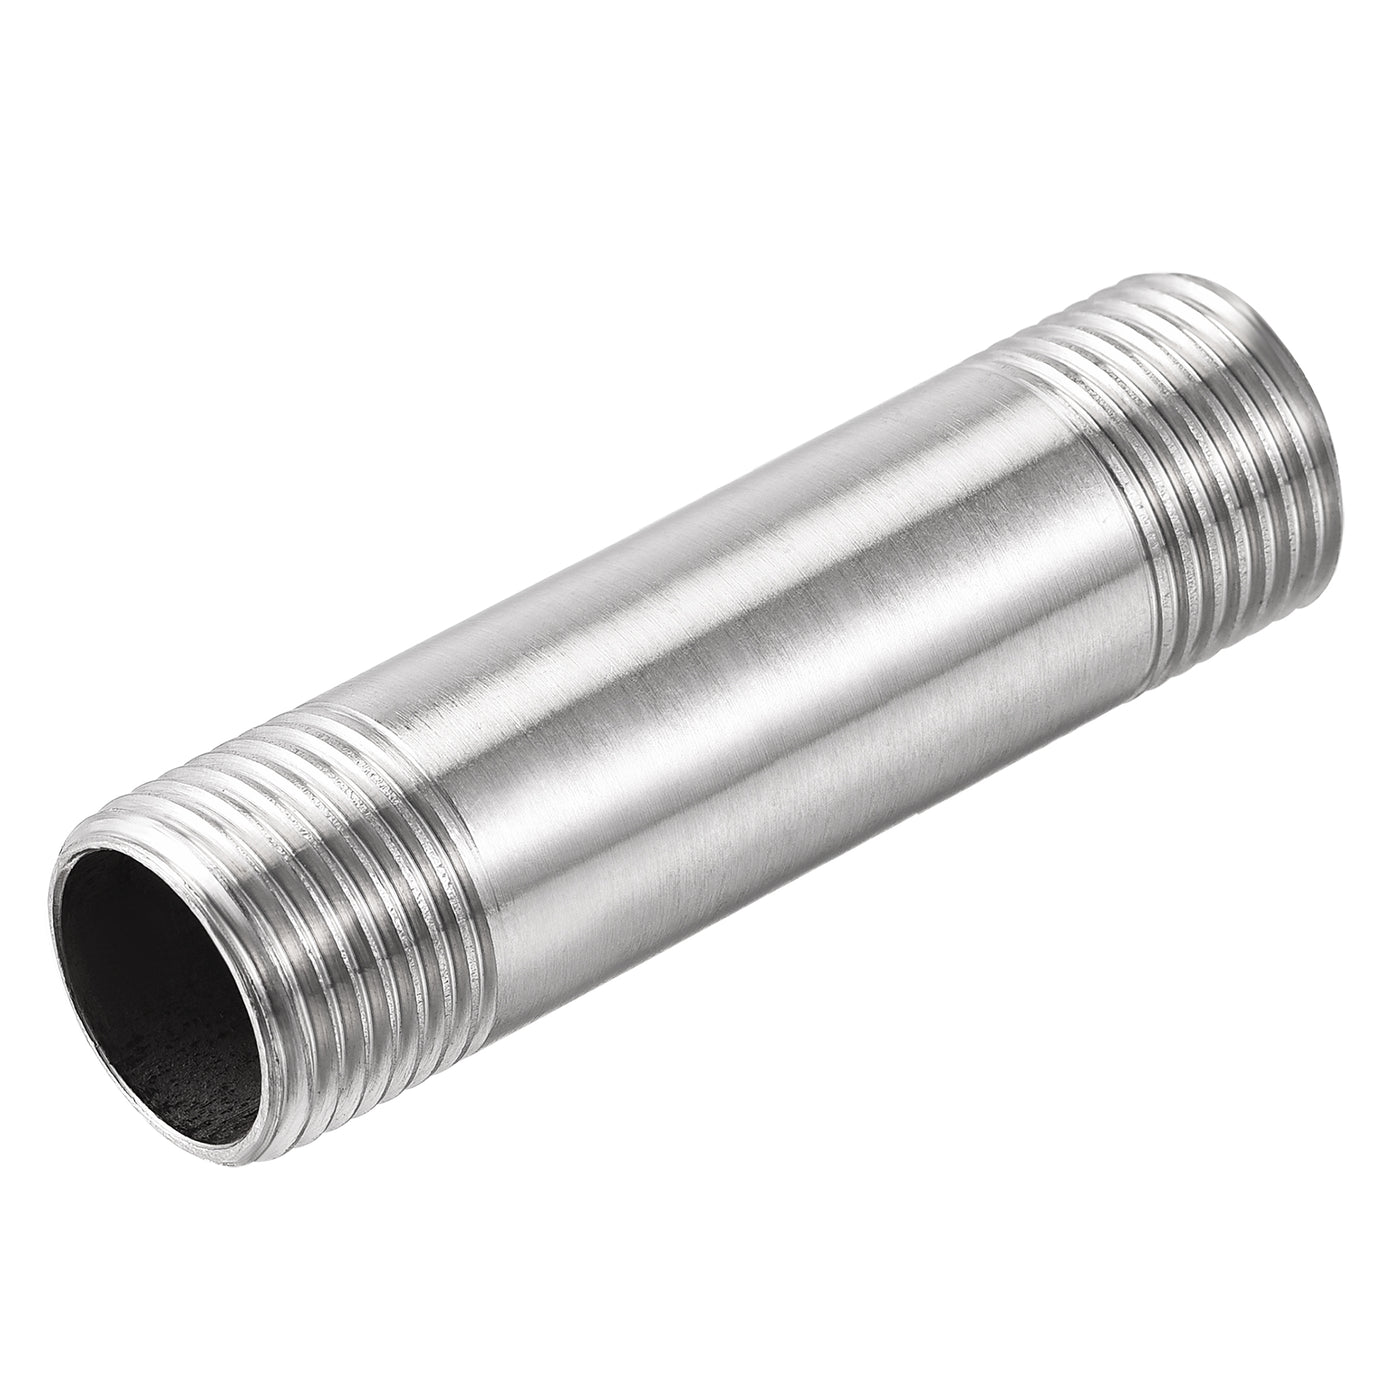 Uxcell Uxcell Stainless Steel Pipe Fitting G1/2 Male to G1/2 Male Thread 400mm Length Coupler